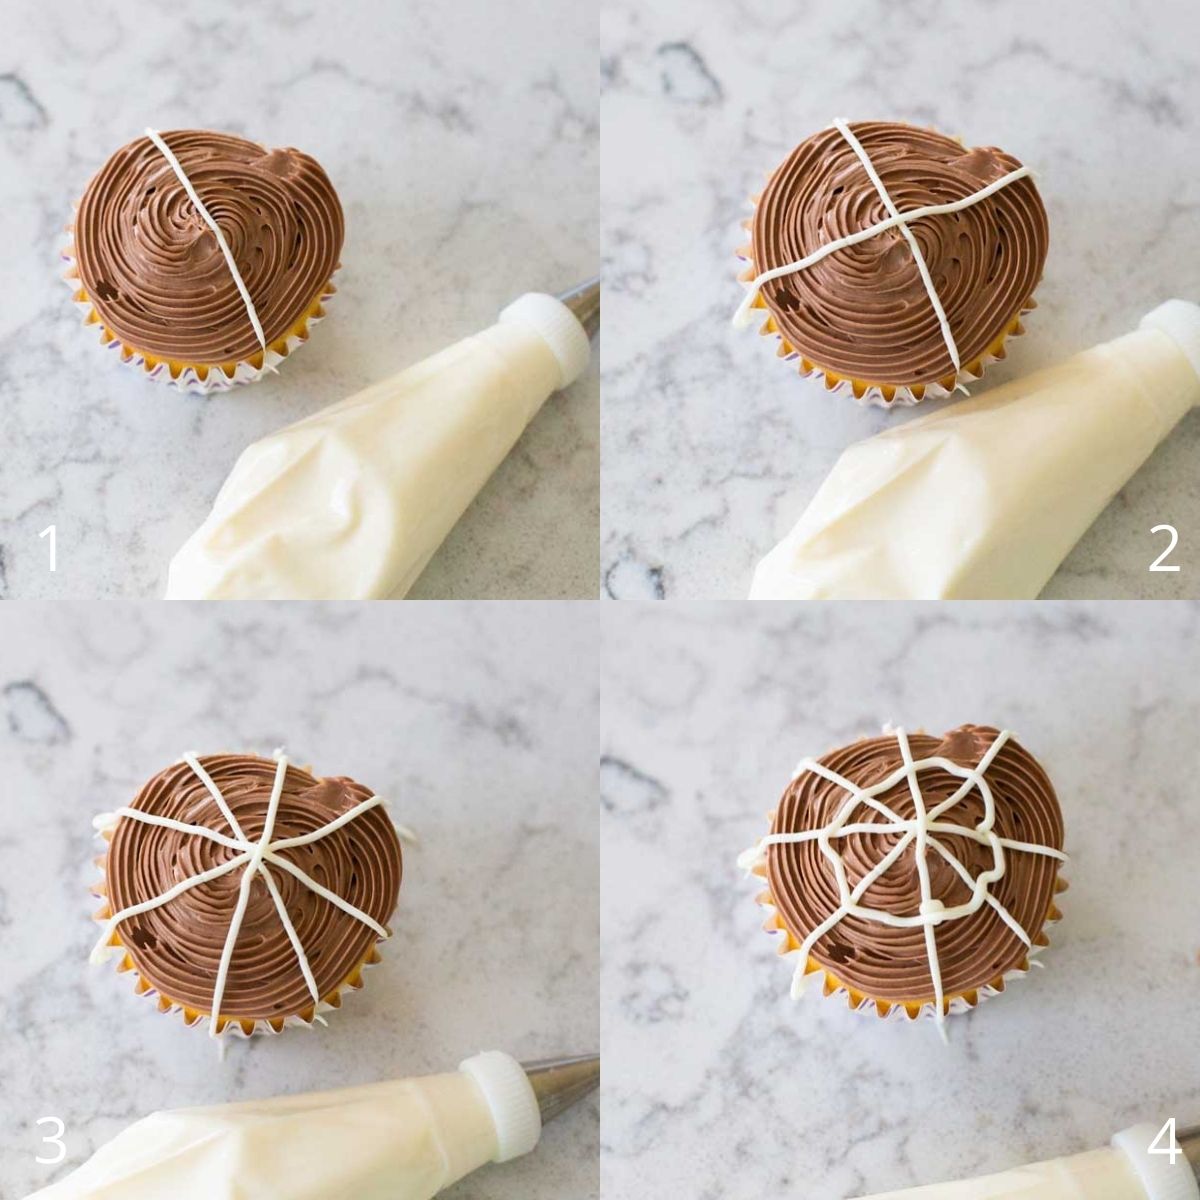 Step by step photos show how to pipe a spider web out of cream cheese frosting onto a chocolate cupcake.